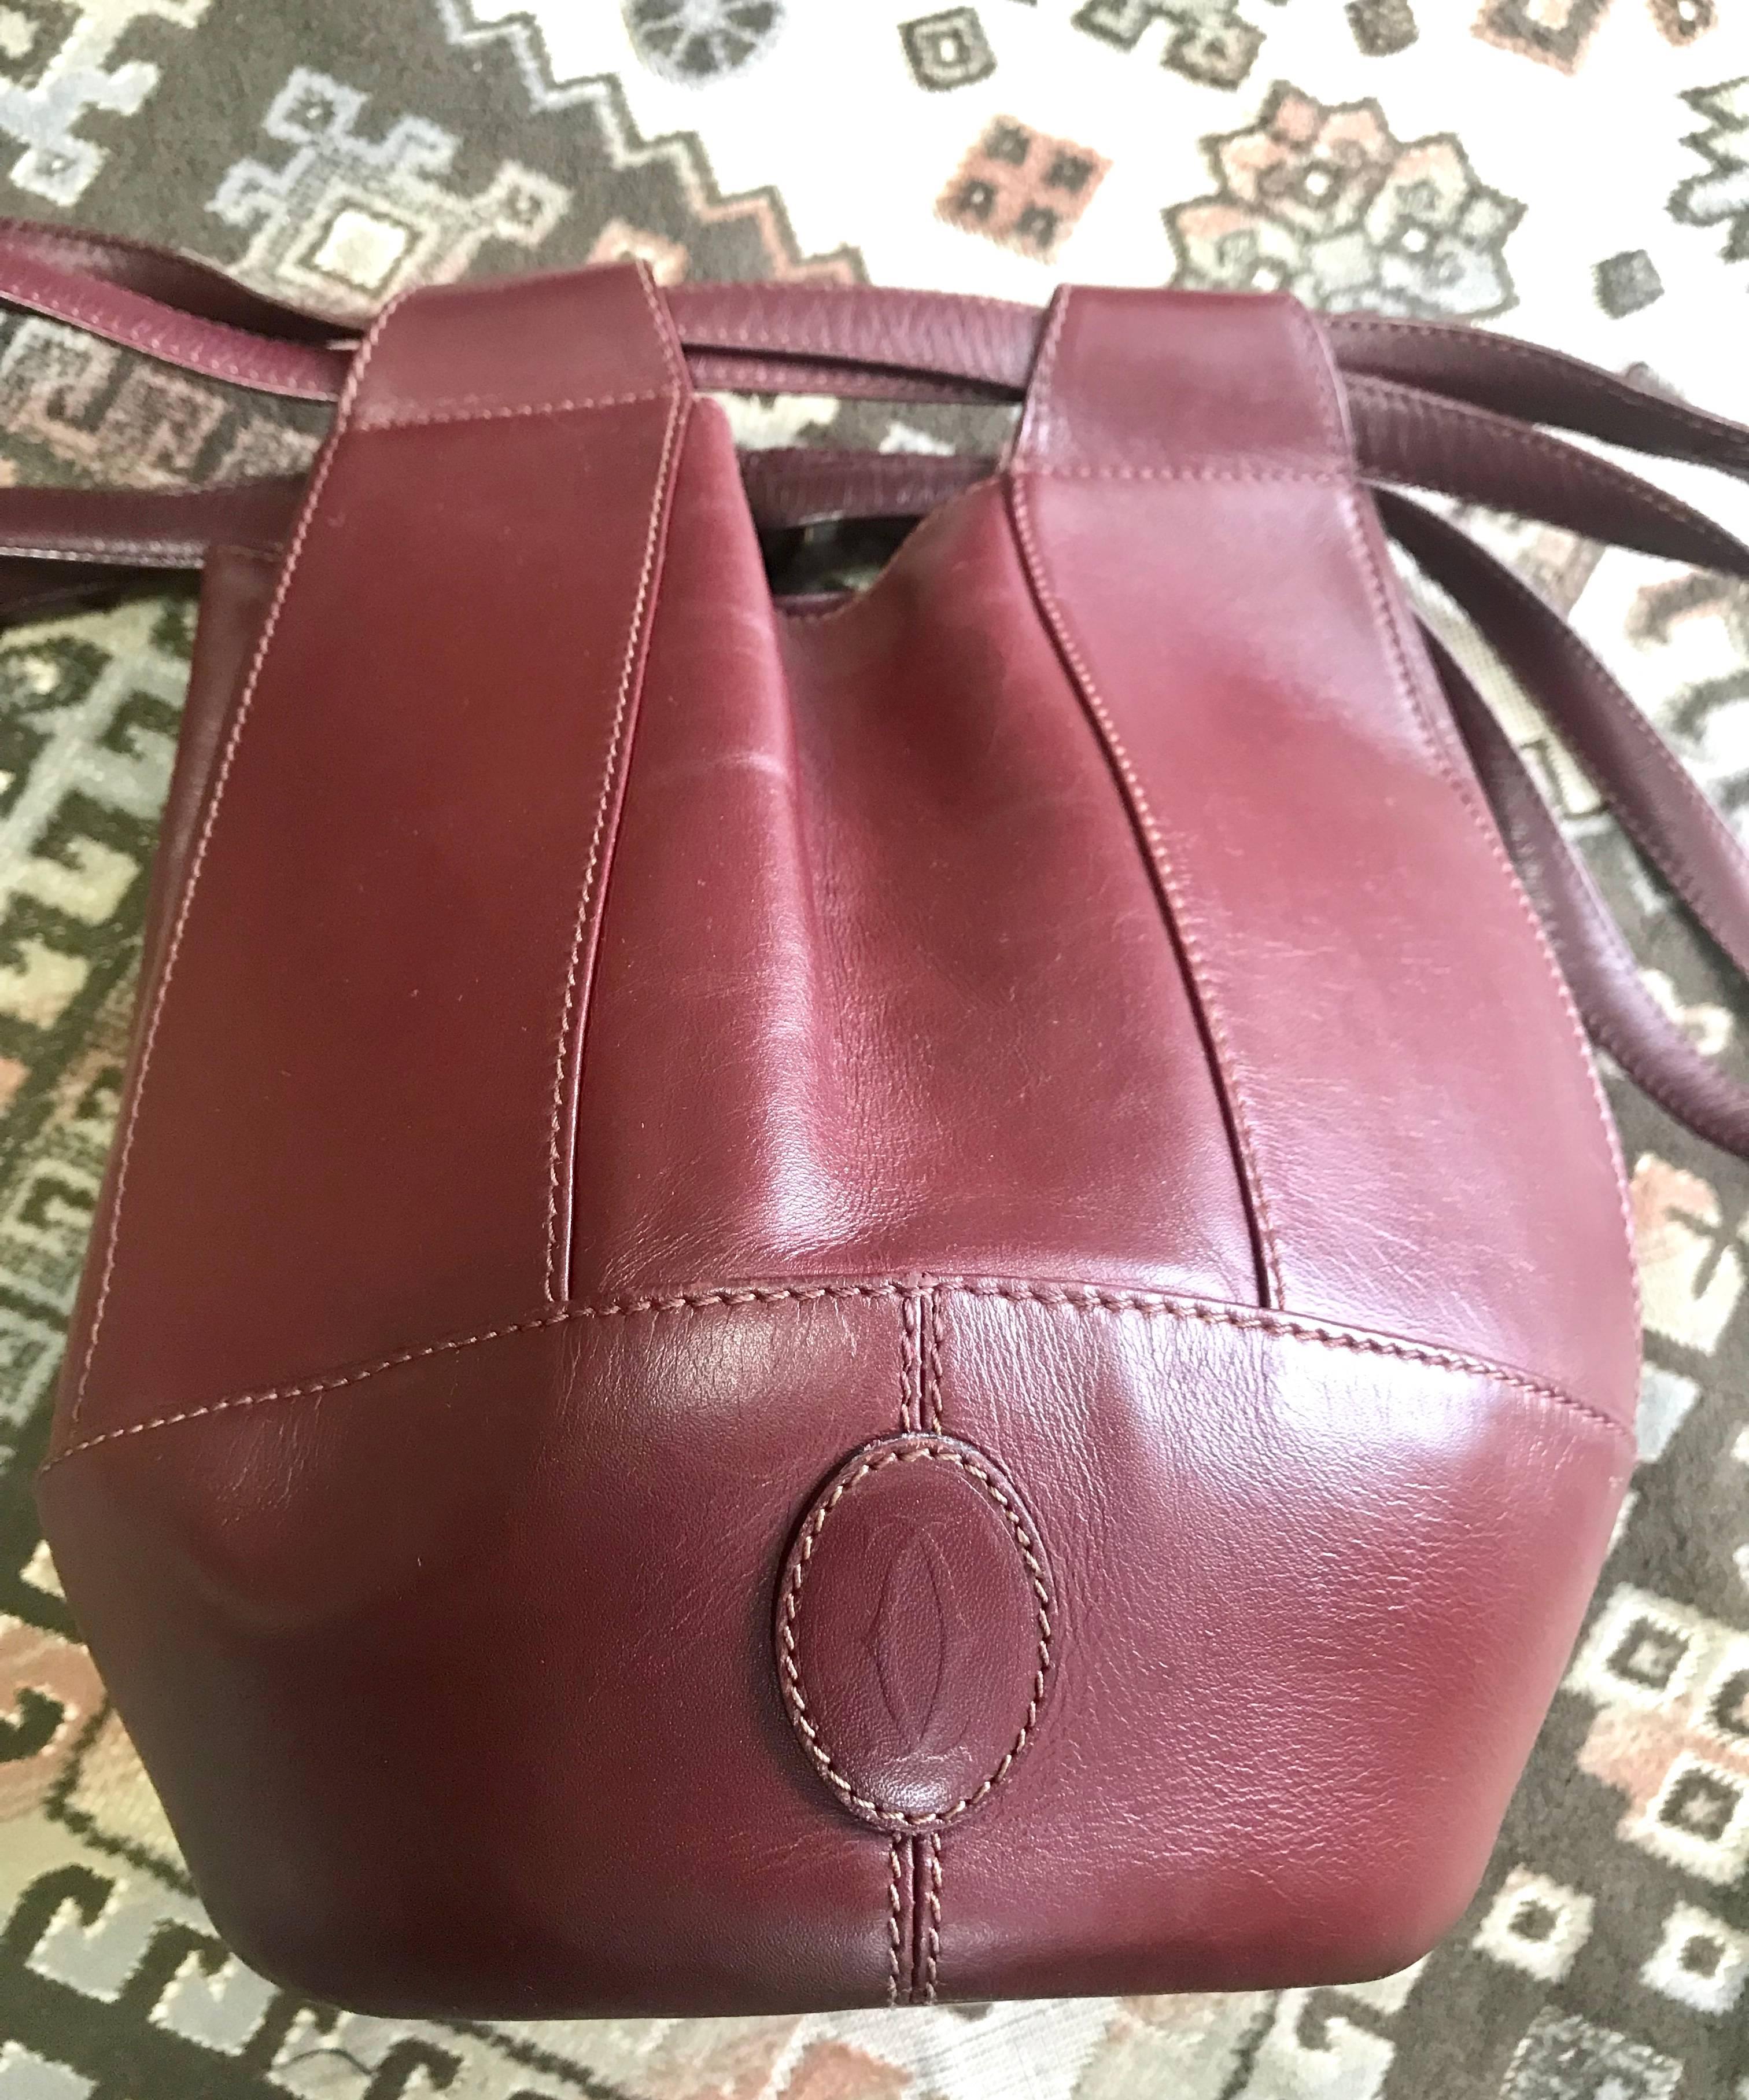 1990s. Vintage Cartier tulip 3 dimension hobo bucket shoulder bag in wine color leather. Classic purse from must de Cartier collection.

Here is another beautiful vintage piece from Cartier, back in the 90's, must de Cartier Collection.

Unique 3D